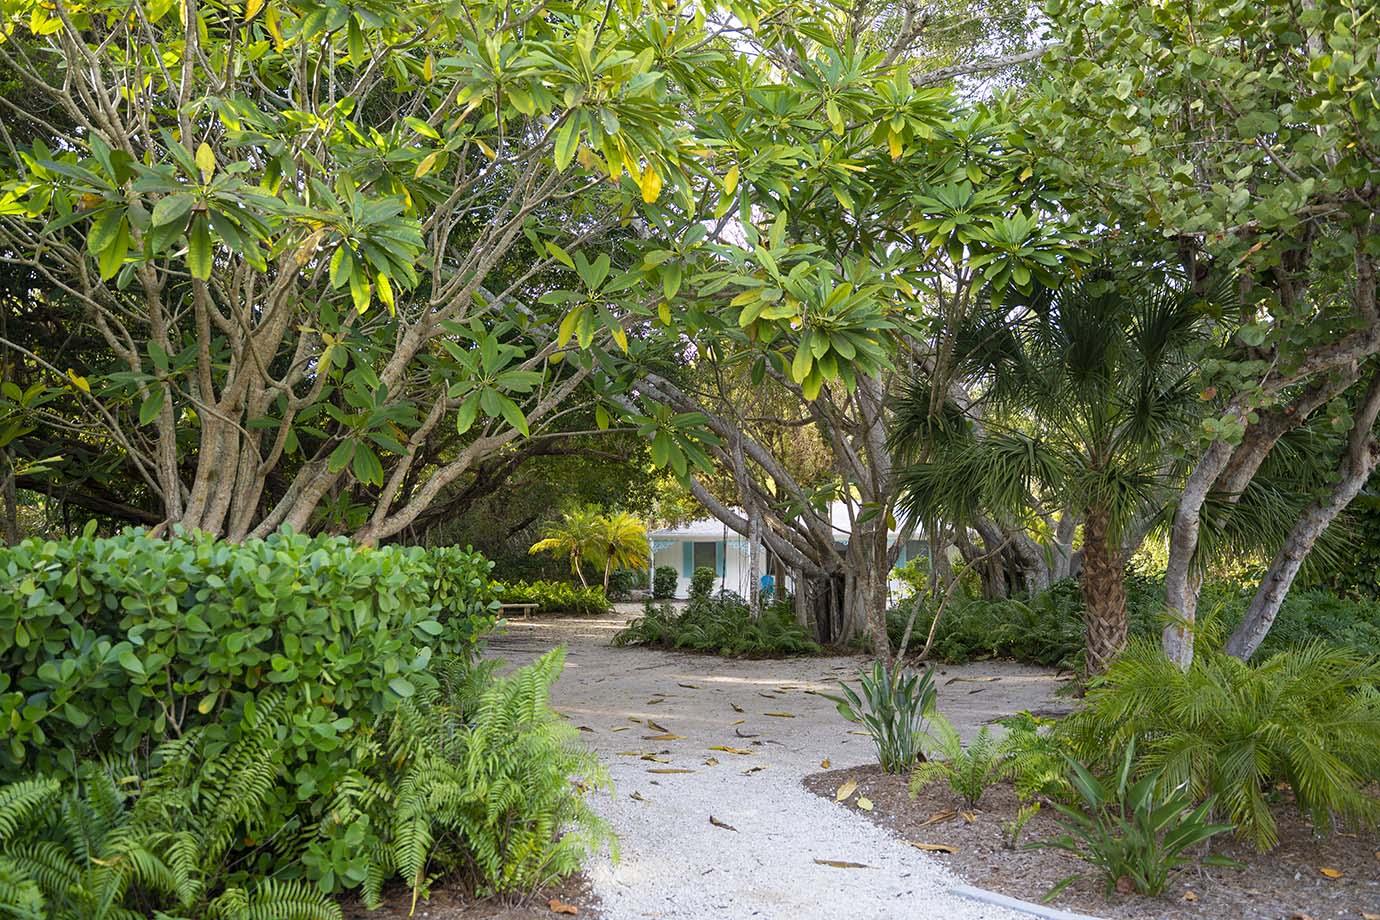 Array of Trees with Green Leaves on pathway outside of the Sea Oats Estate in Captiva Island, FL